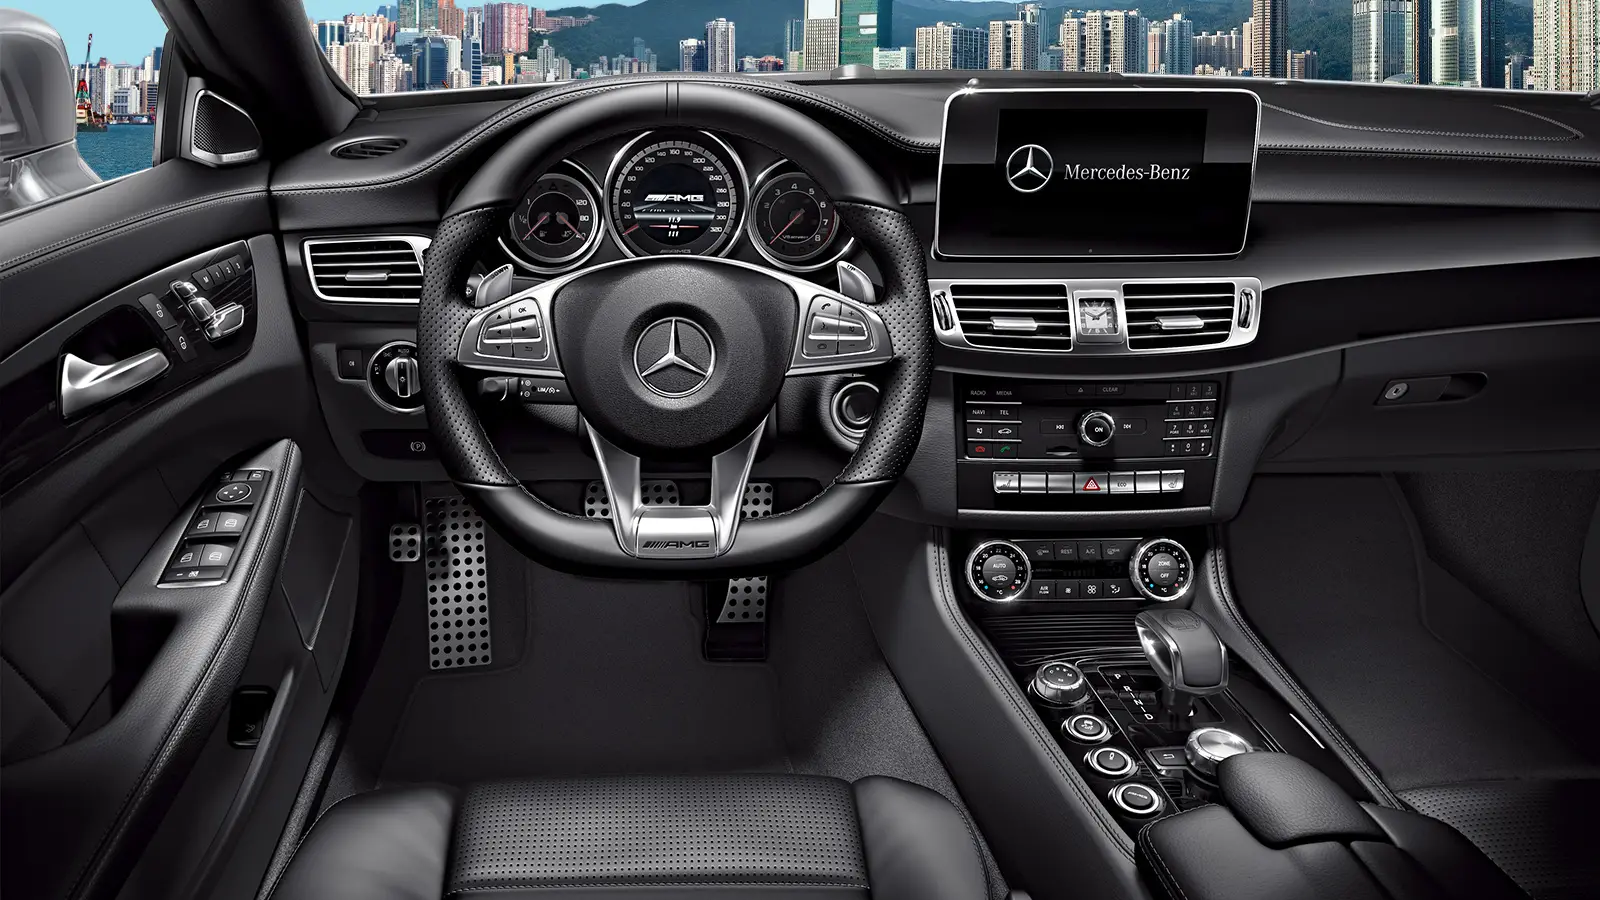 Mercedes Benz AMG CLS 63 S interior front cross view